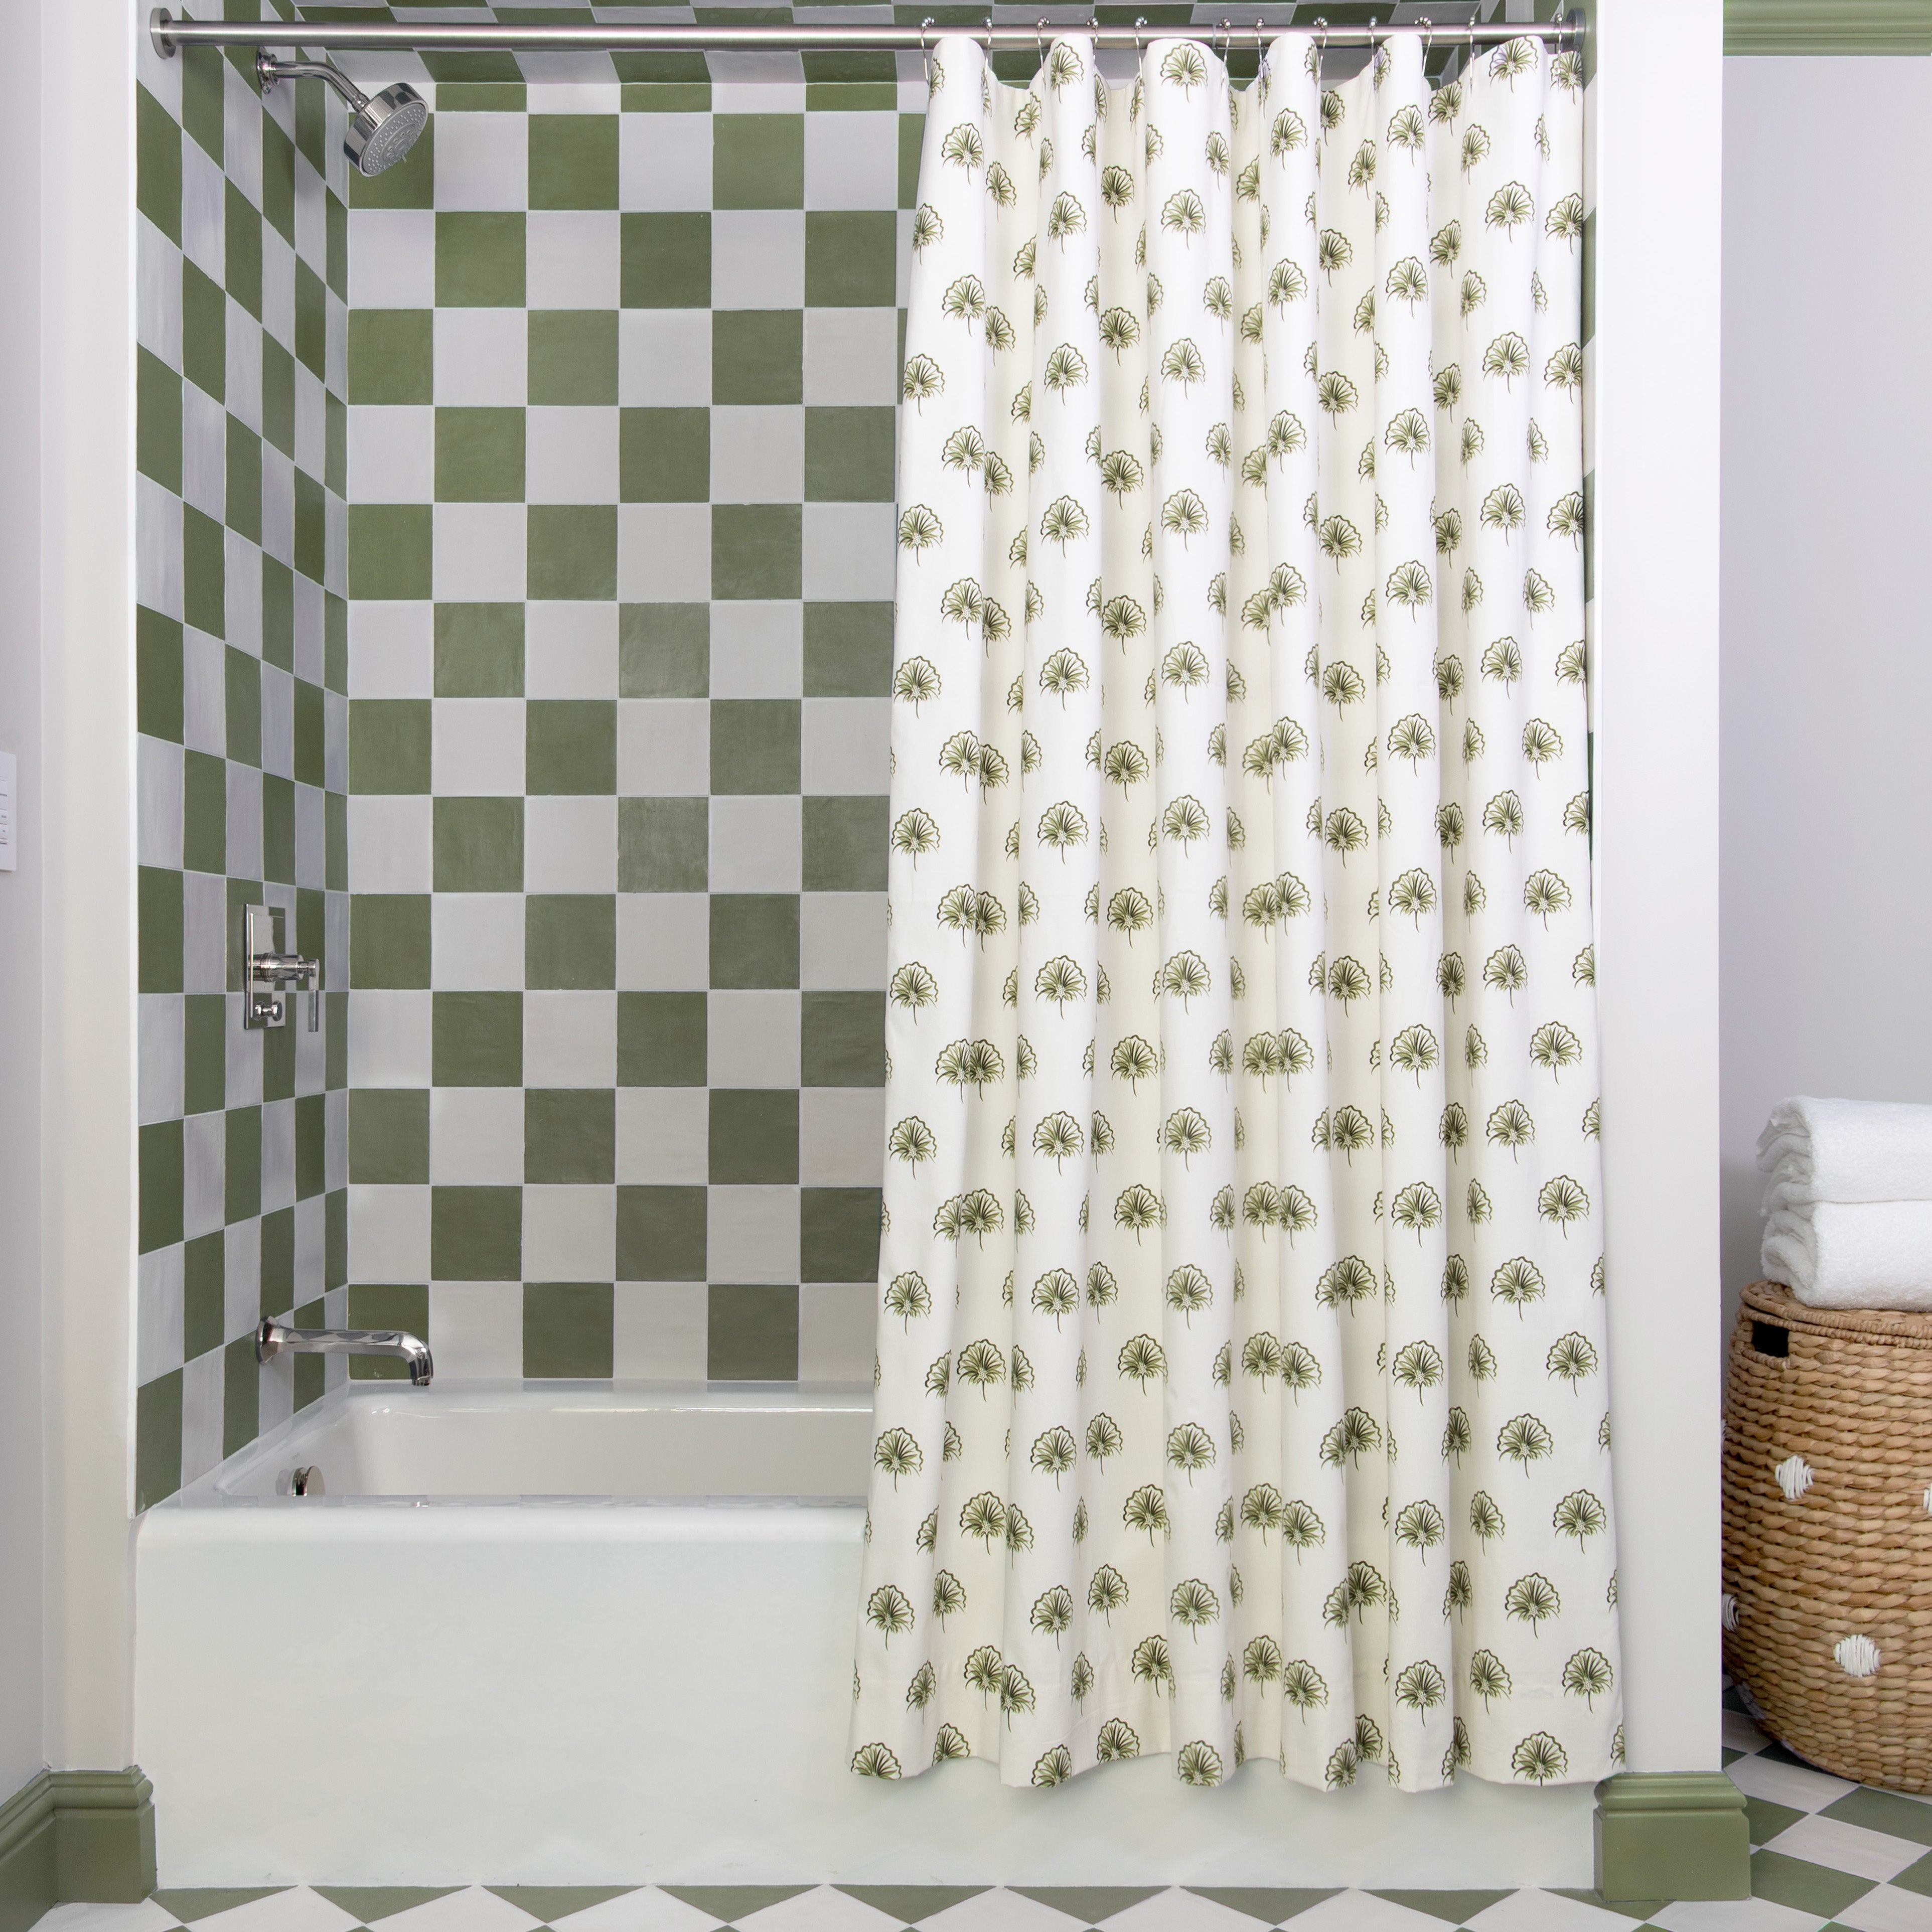 Green Floral Printed shower curtain hanging on rod in front of white tub in bathroom with green and white tiles